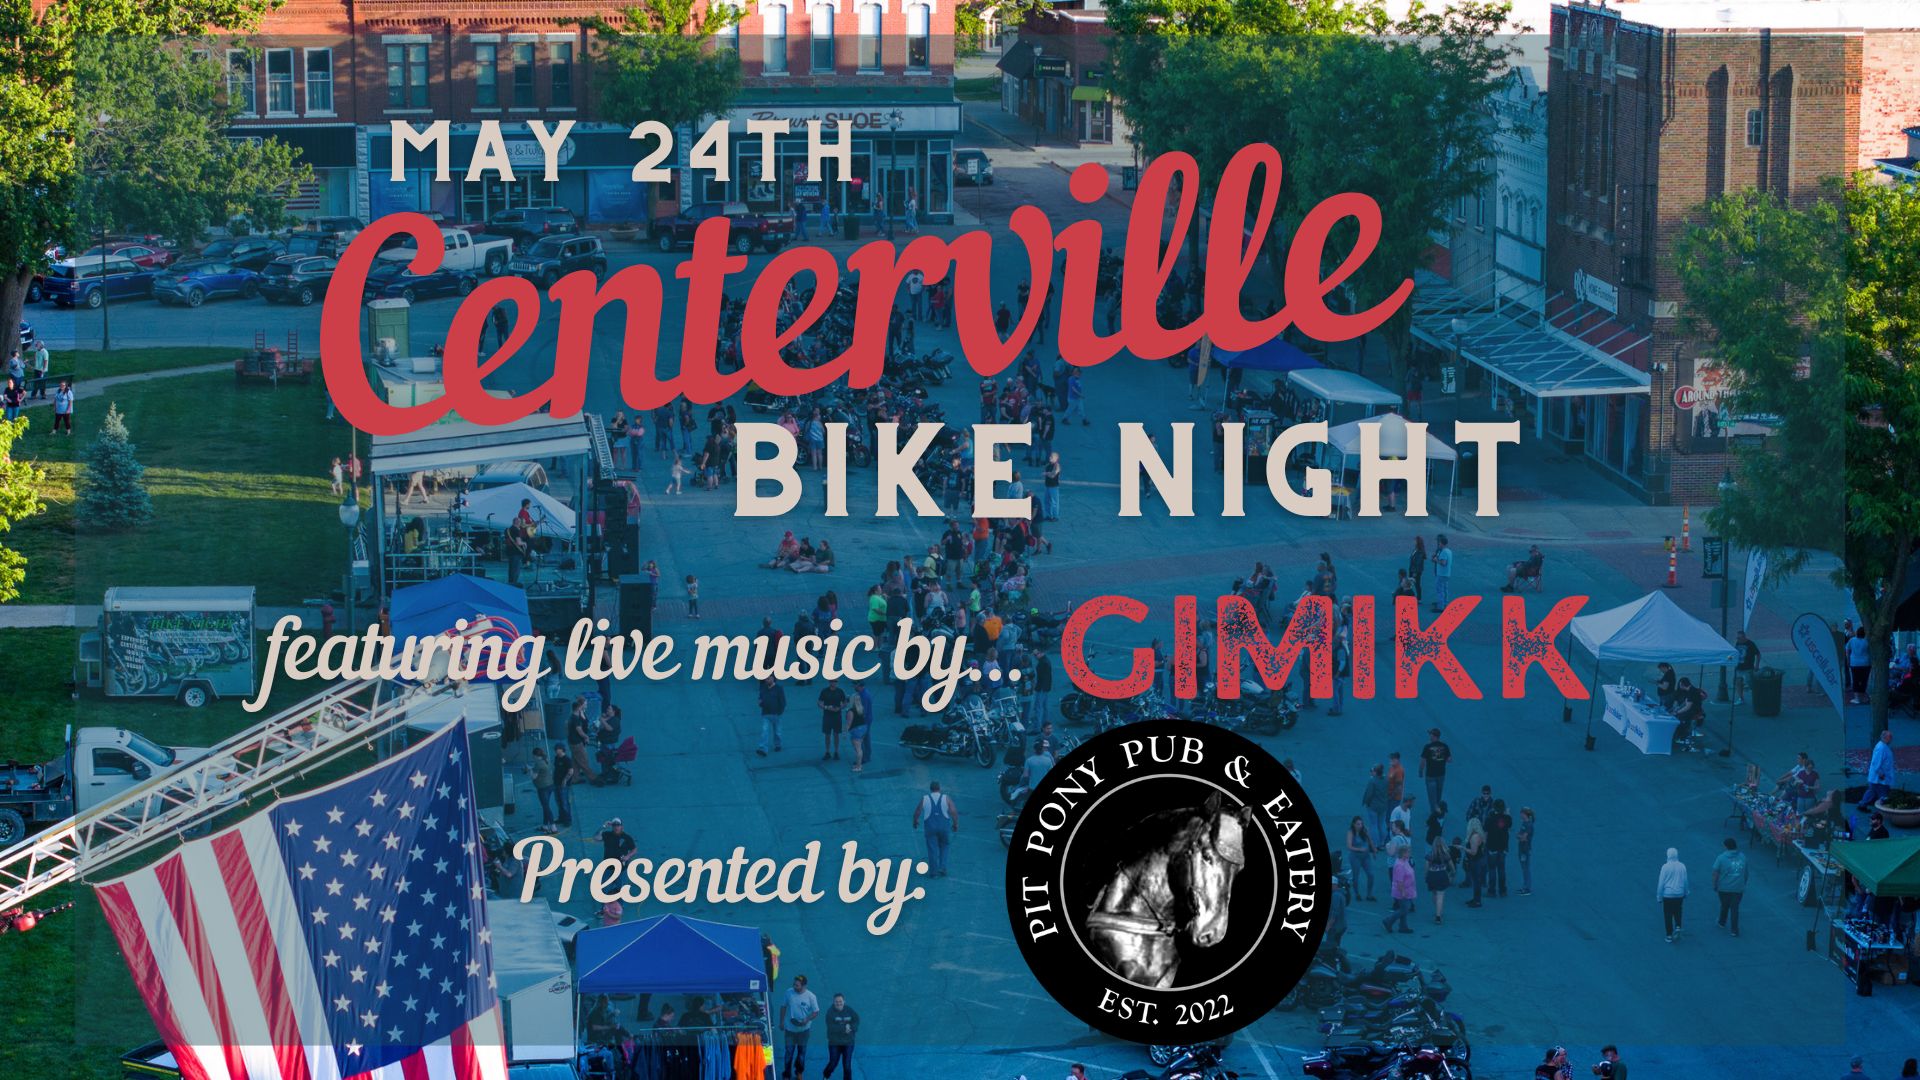 Centerville Bike Night May 24th